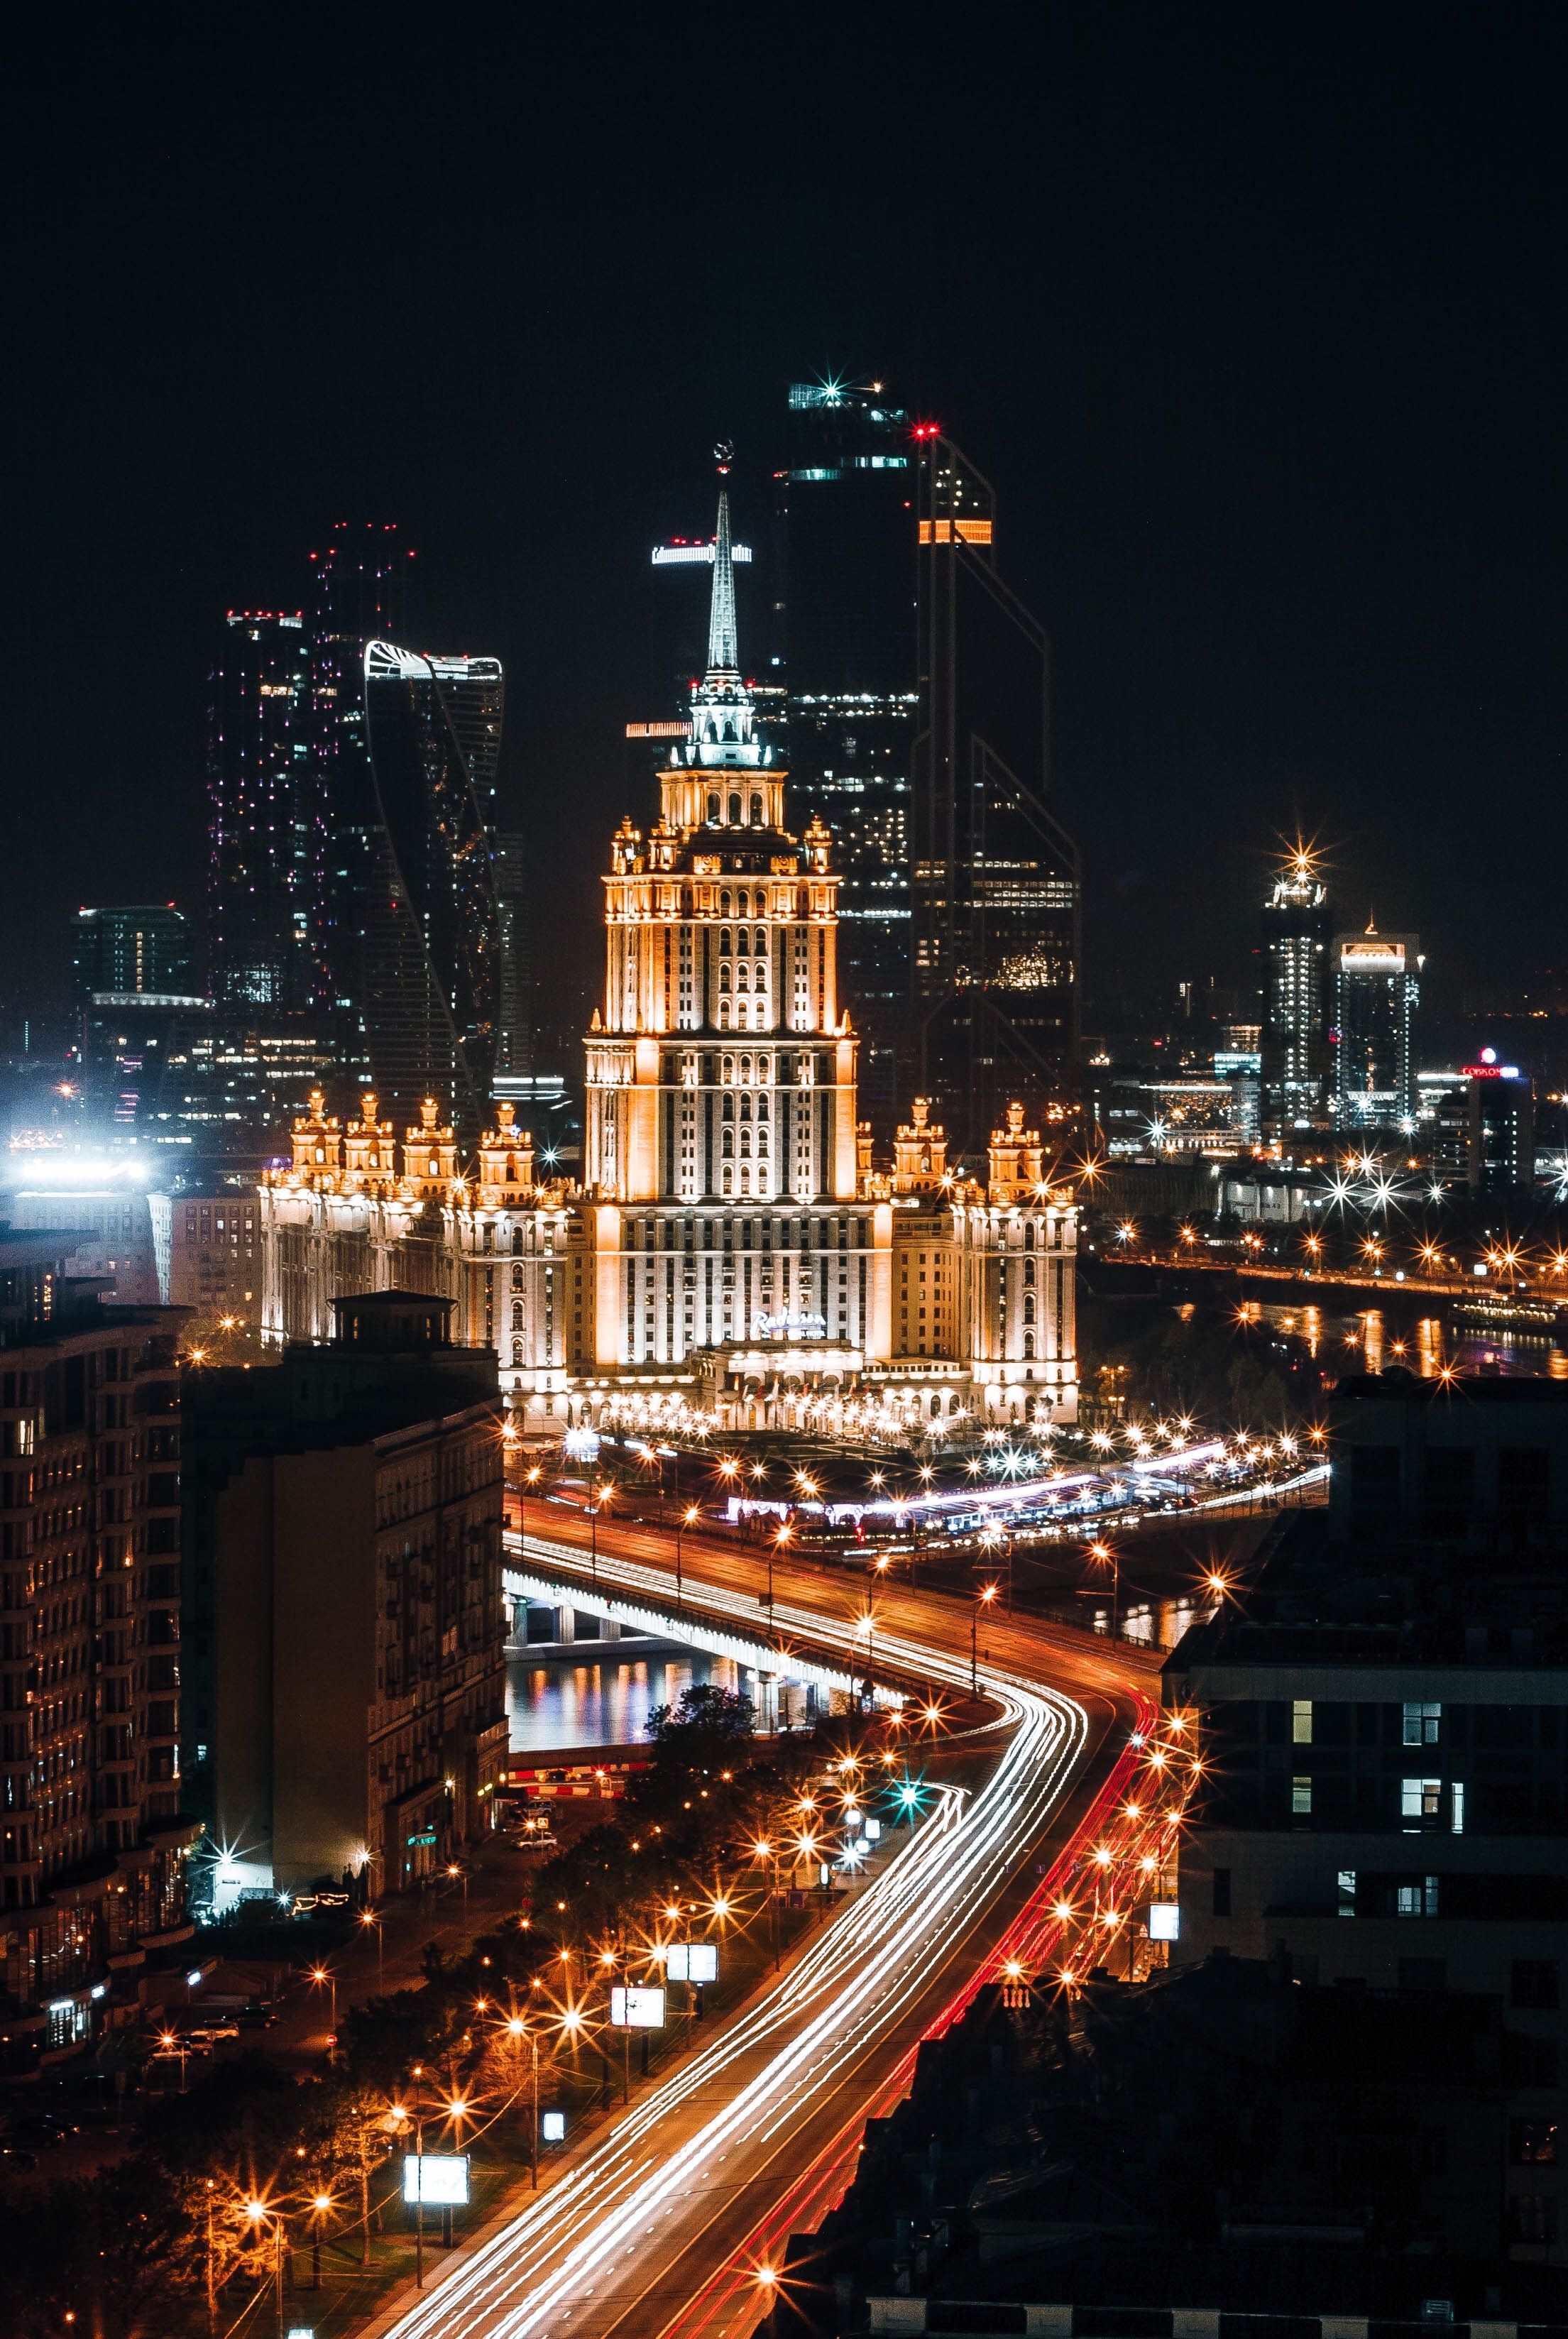 Download wallpaper 2209x3295 moscow, russia, night city